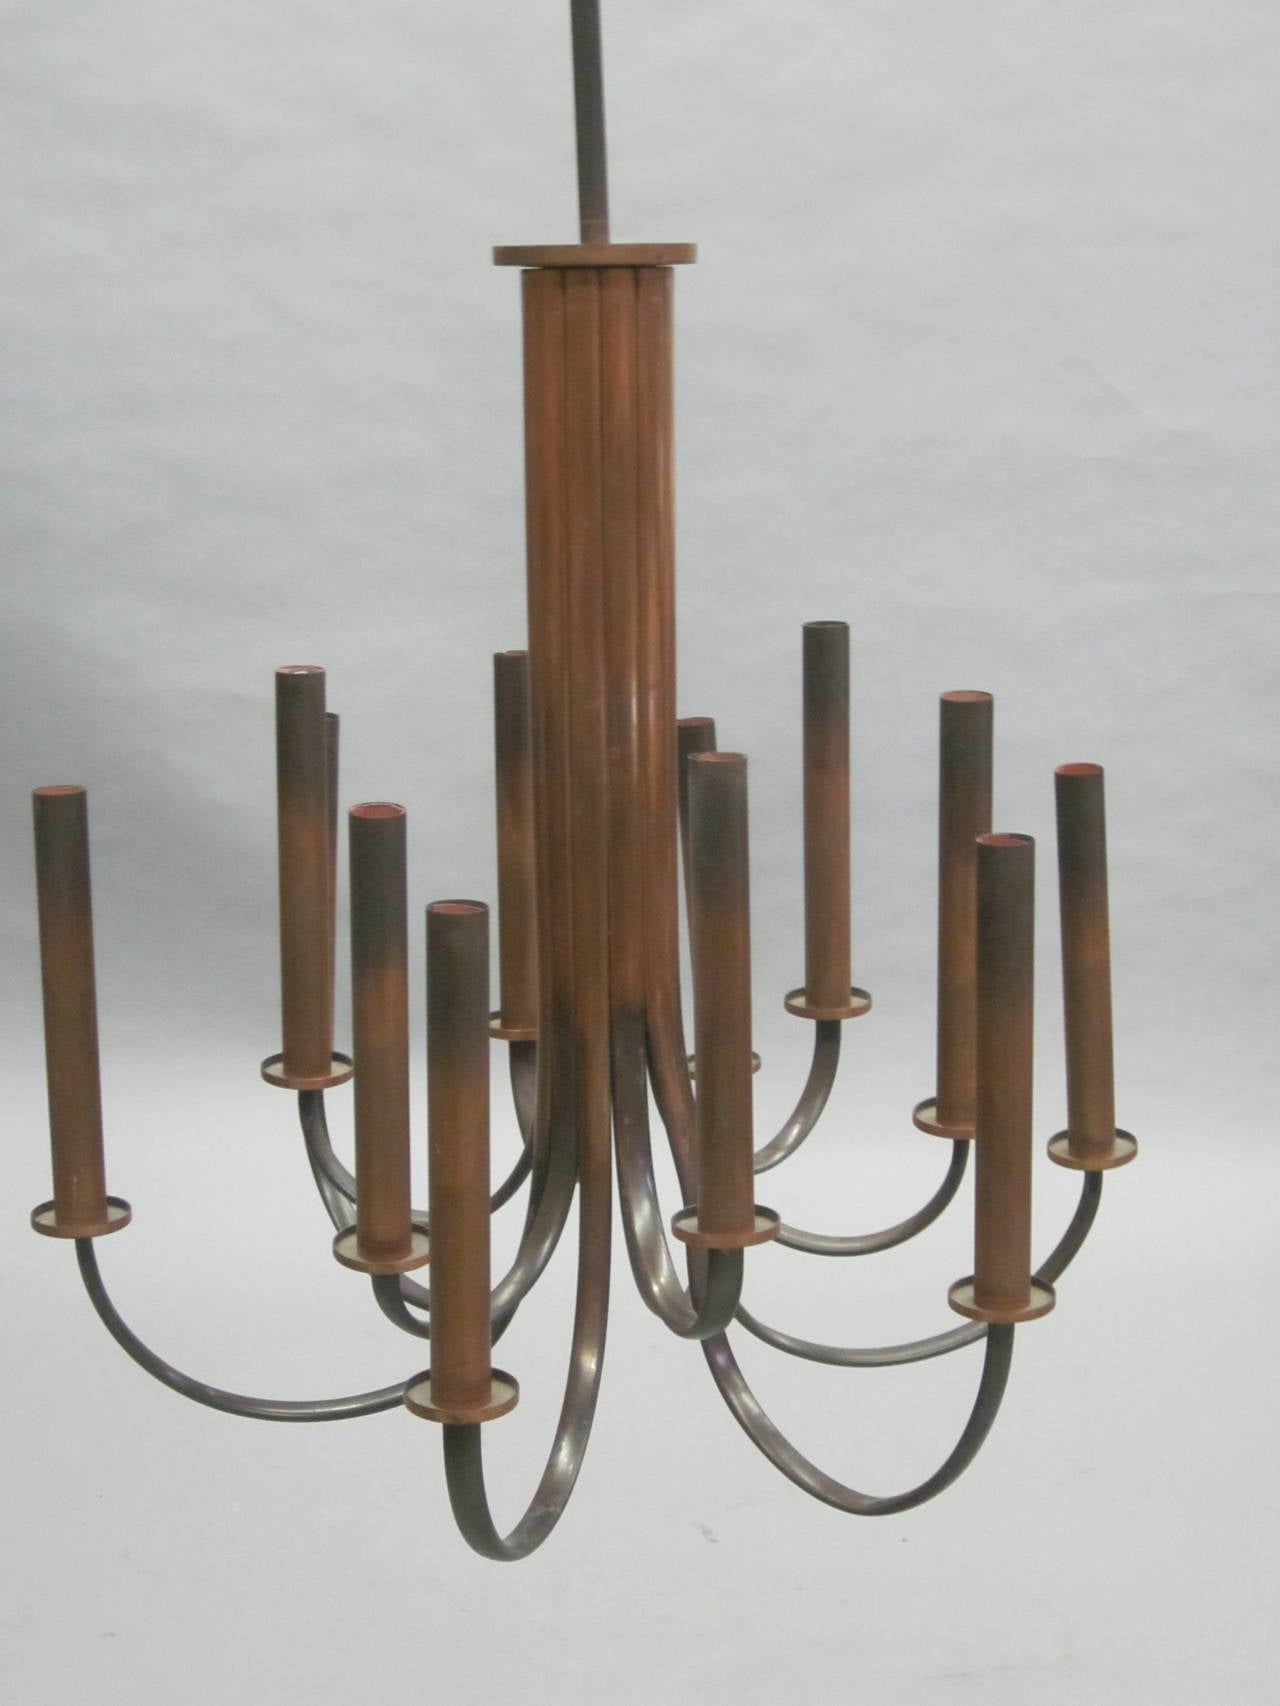 A Rare and Elegant French Post Art Deco Chandelier in Copper with 12 Dramatic Arms Arranged in a Sober, Modern Neoclassical Presentation with Tall Copper Candle Covers. 

Height of Chandelier without stem is 27.5